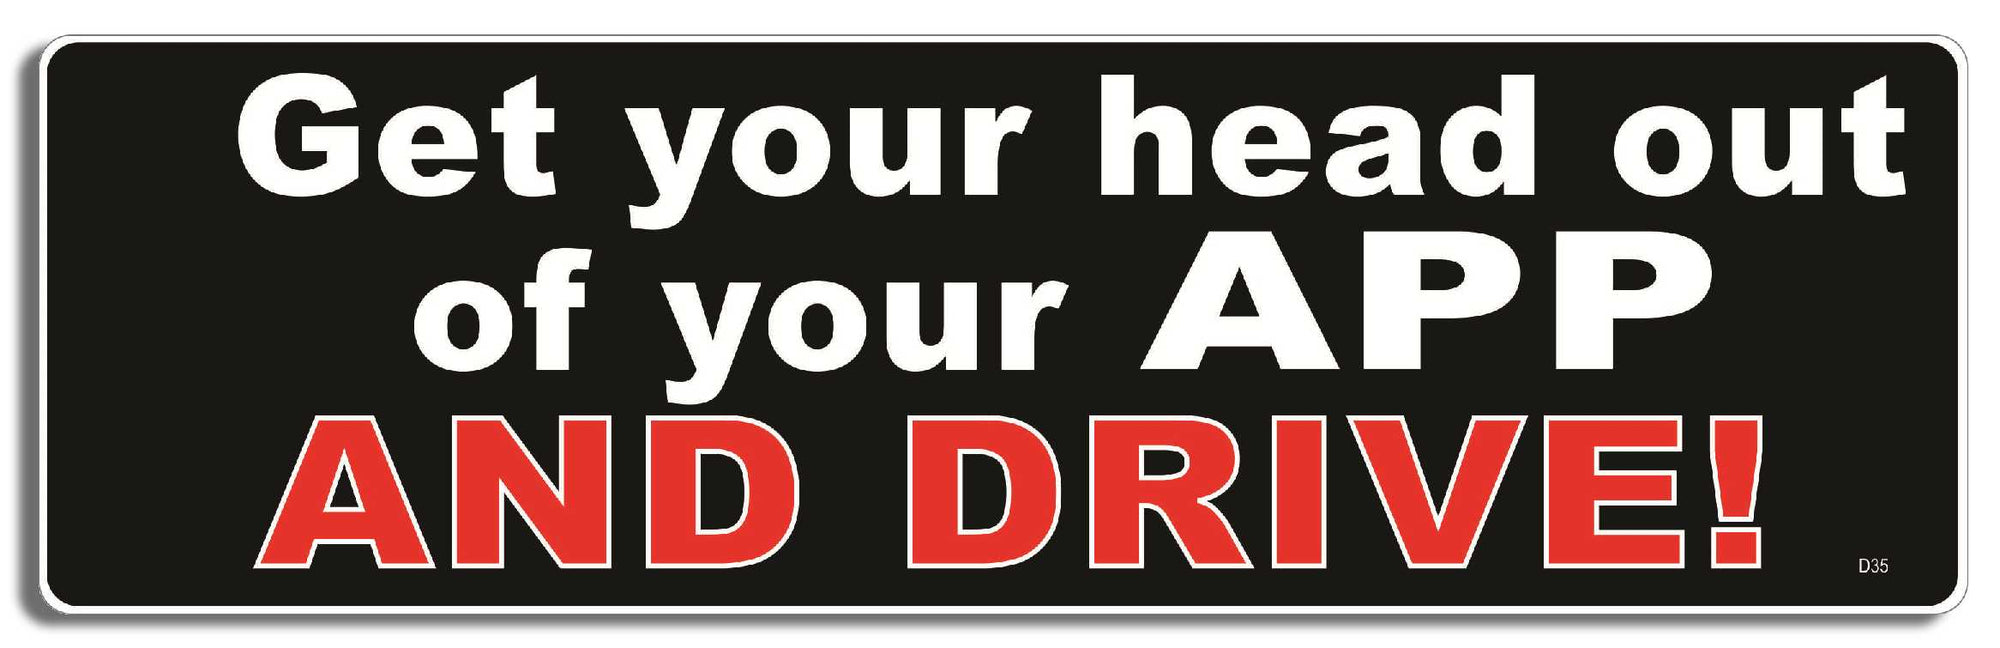 Get your head out of your App and drive! - 3" x 10" Bumper Sticker--Car Magnet- -  Decal Bumper Sticker-funny Bumper Sticker Car Magnet Get your head out of your App and-  Decal for carsdrive safely, Driving, Funny, safe driving, tailgaters, tailgating